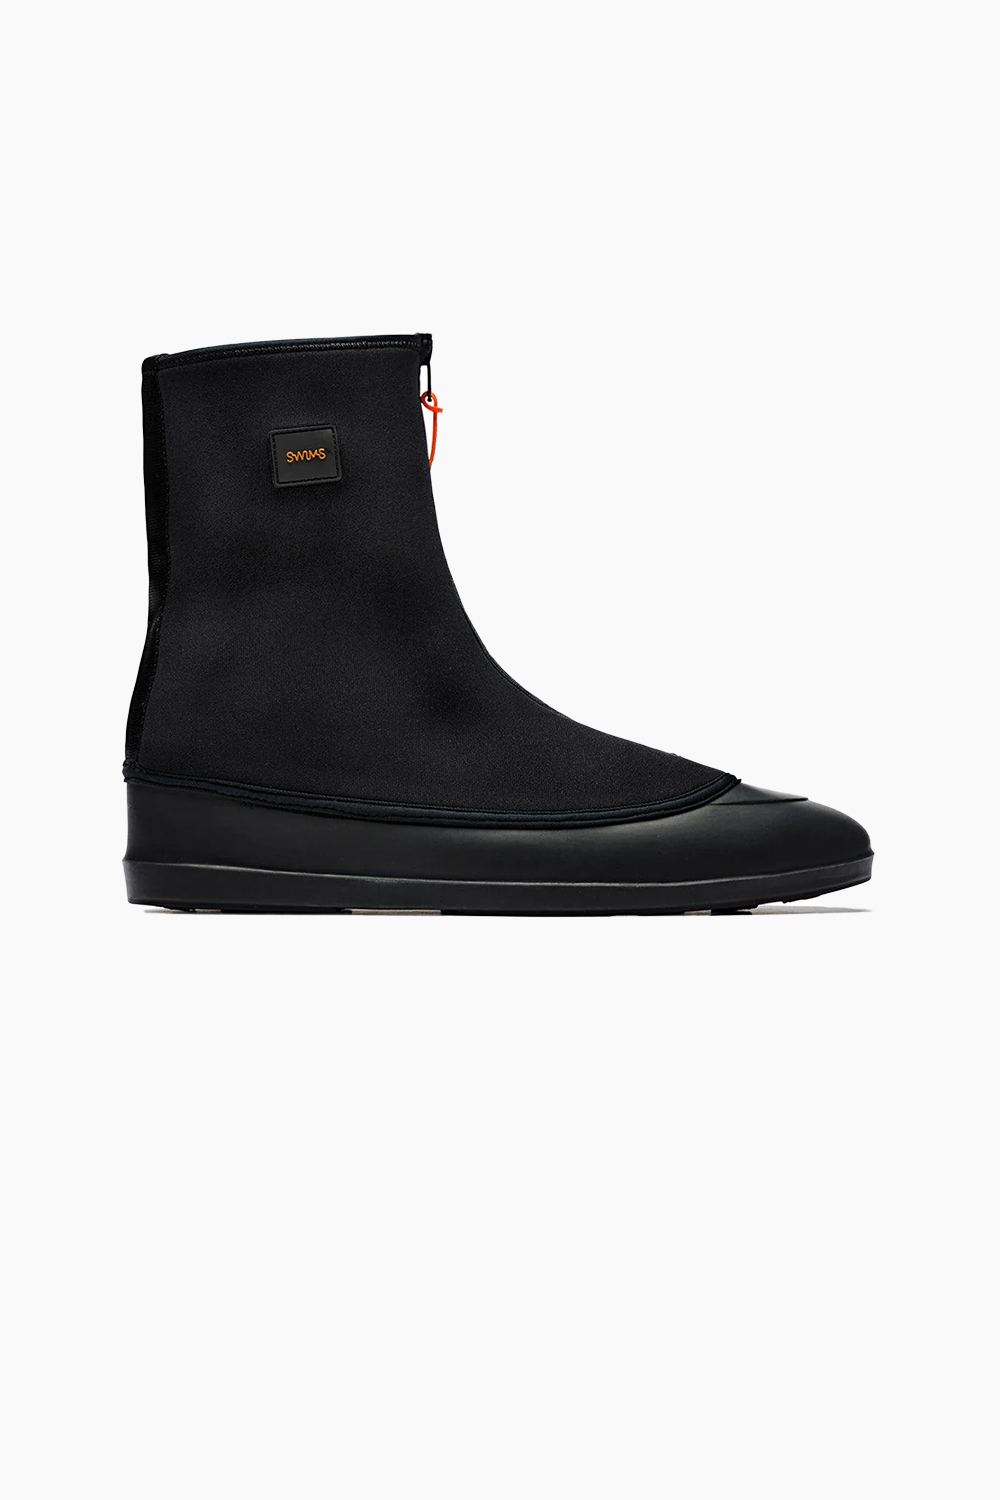 Swims Men's Mobster Galosh Available in Black